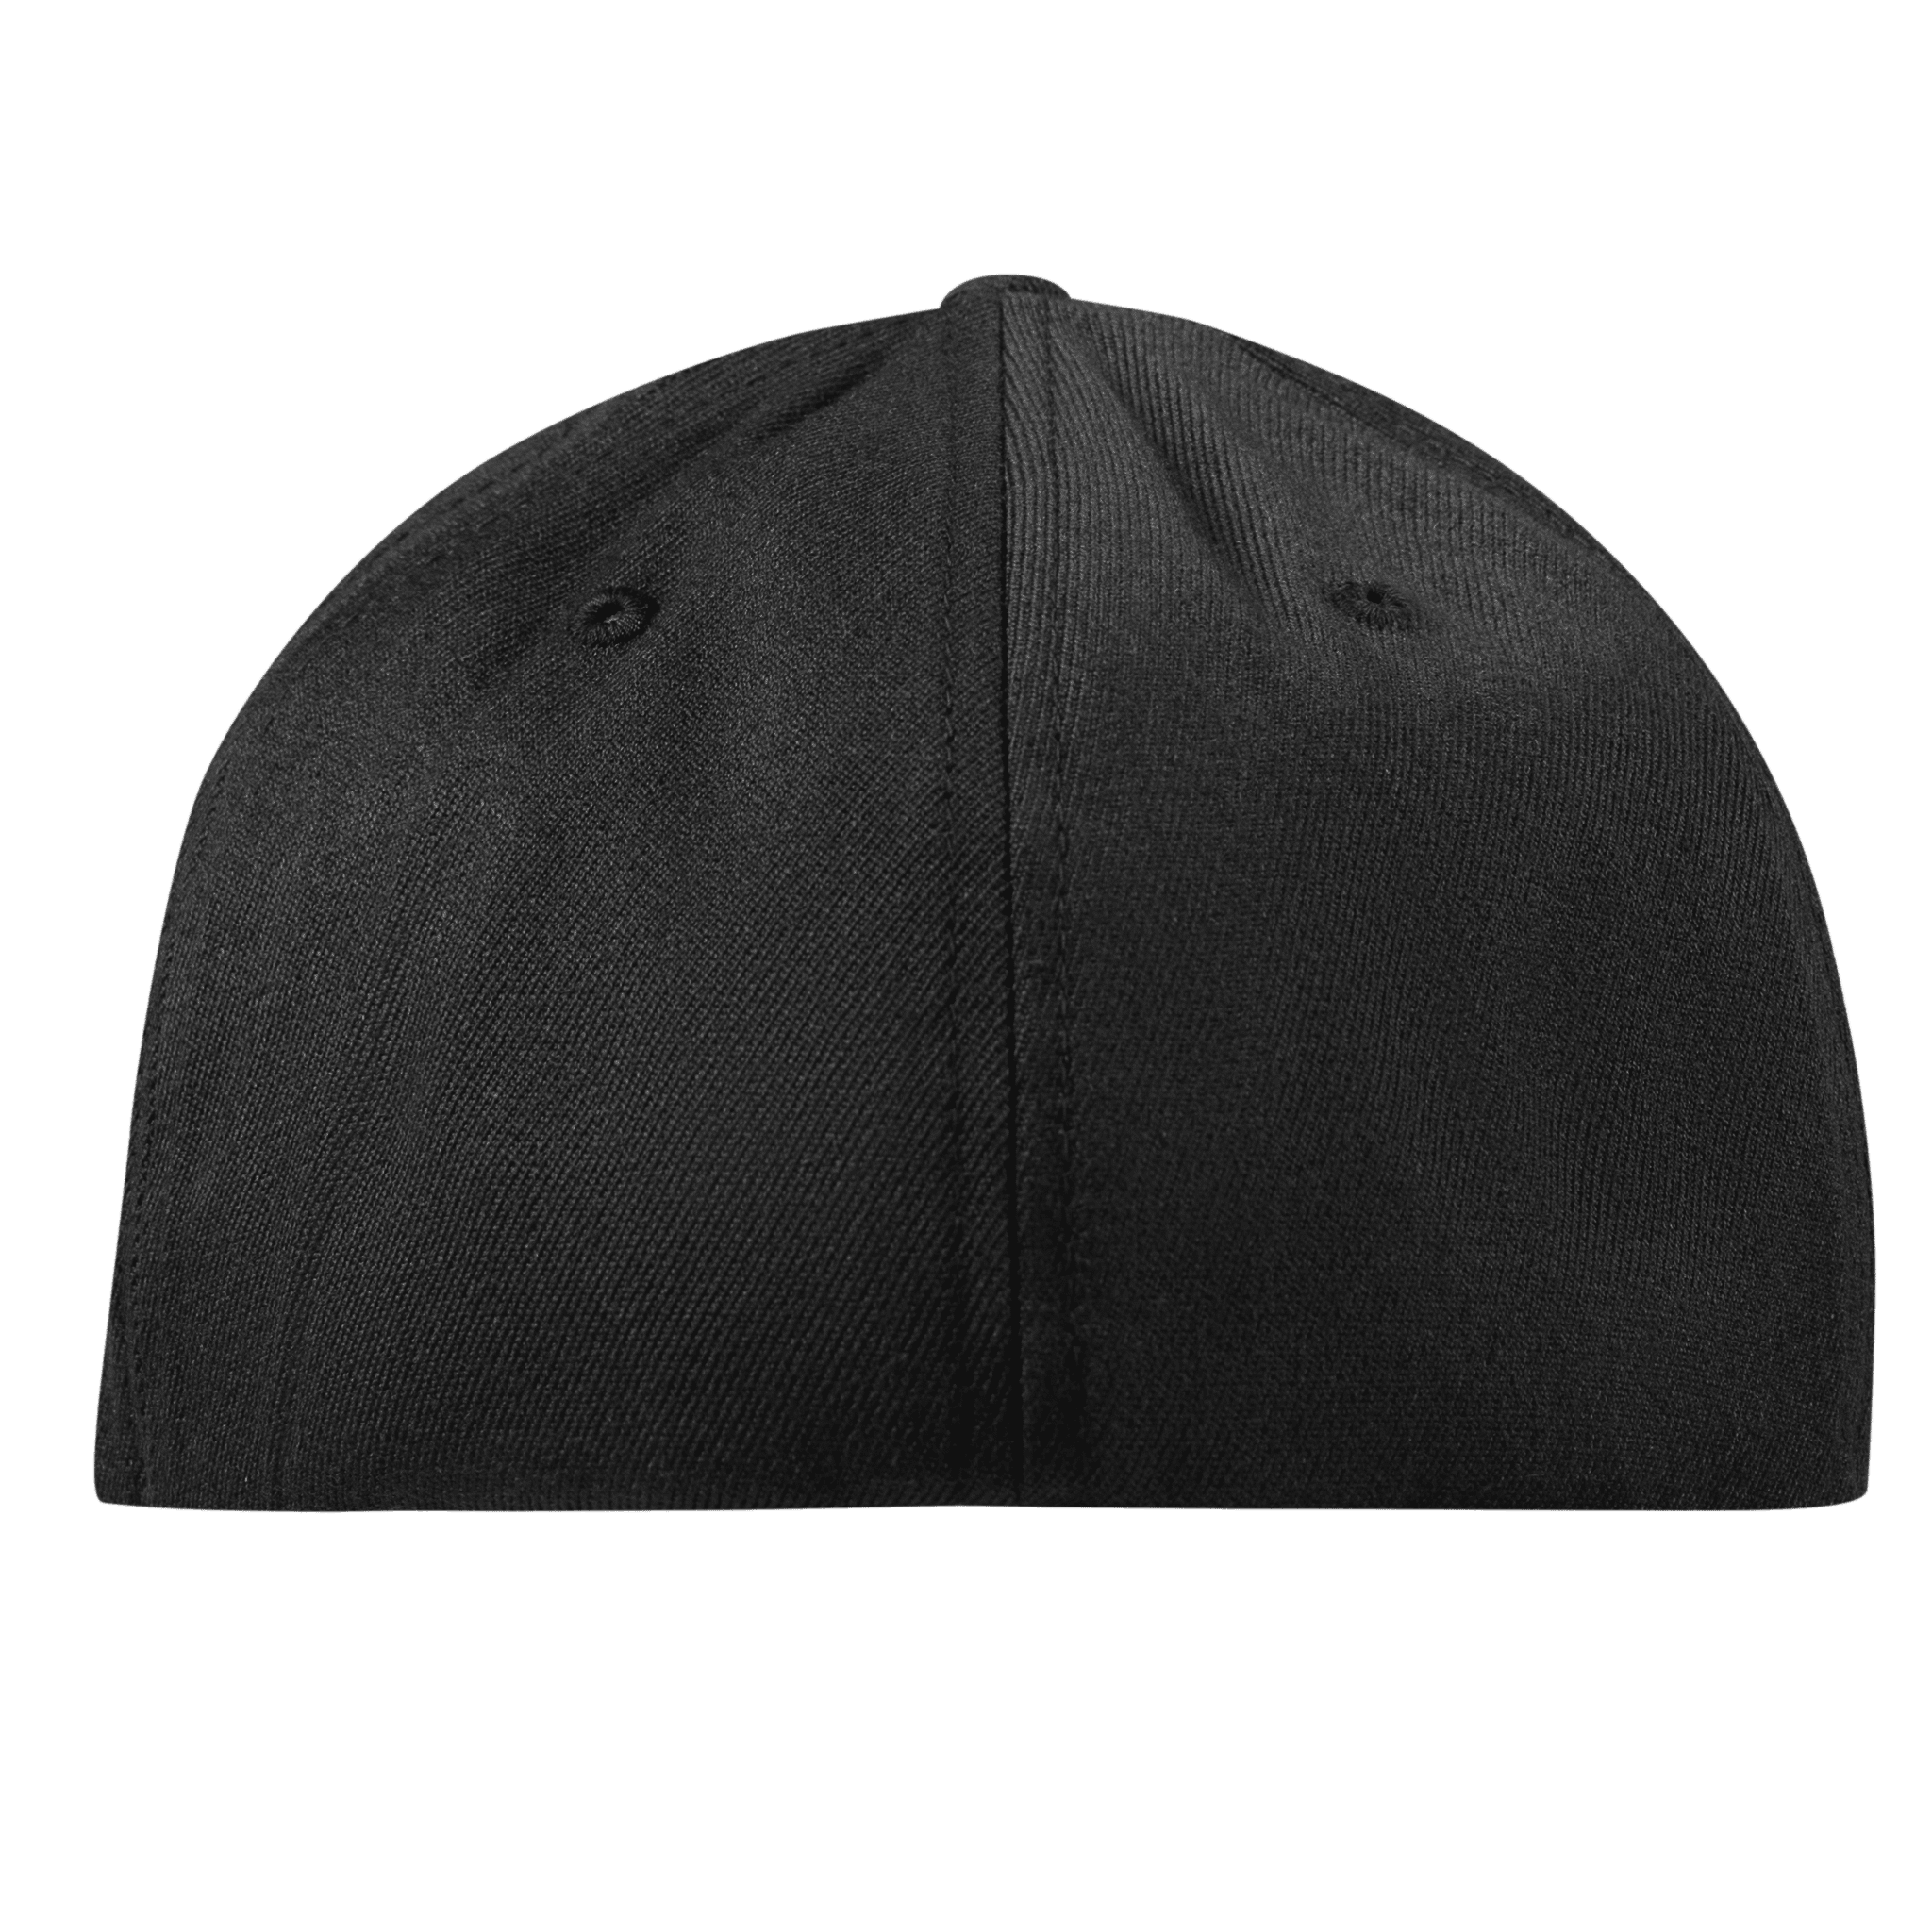 Oklahoma Compass Flexfit Fitted Back Black